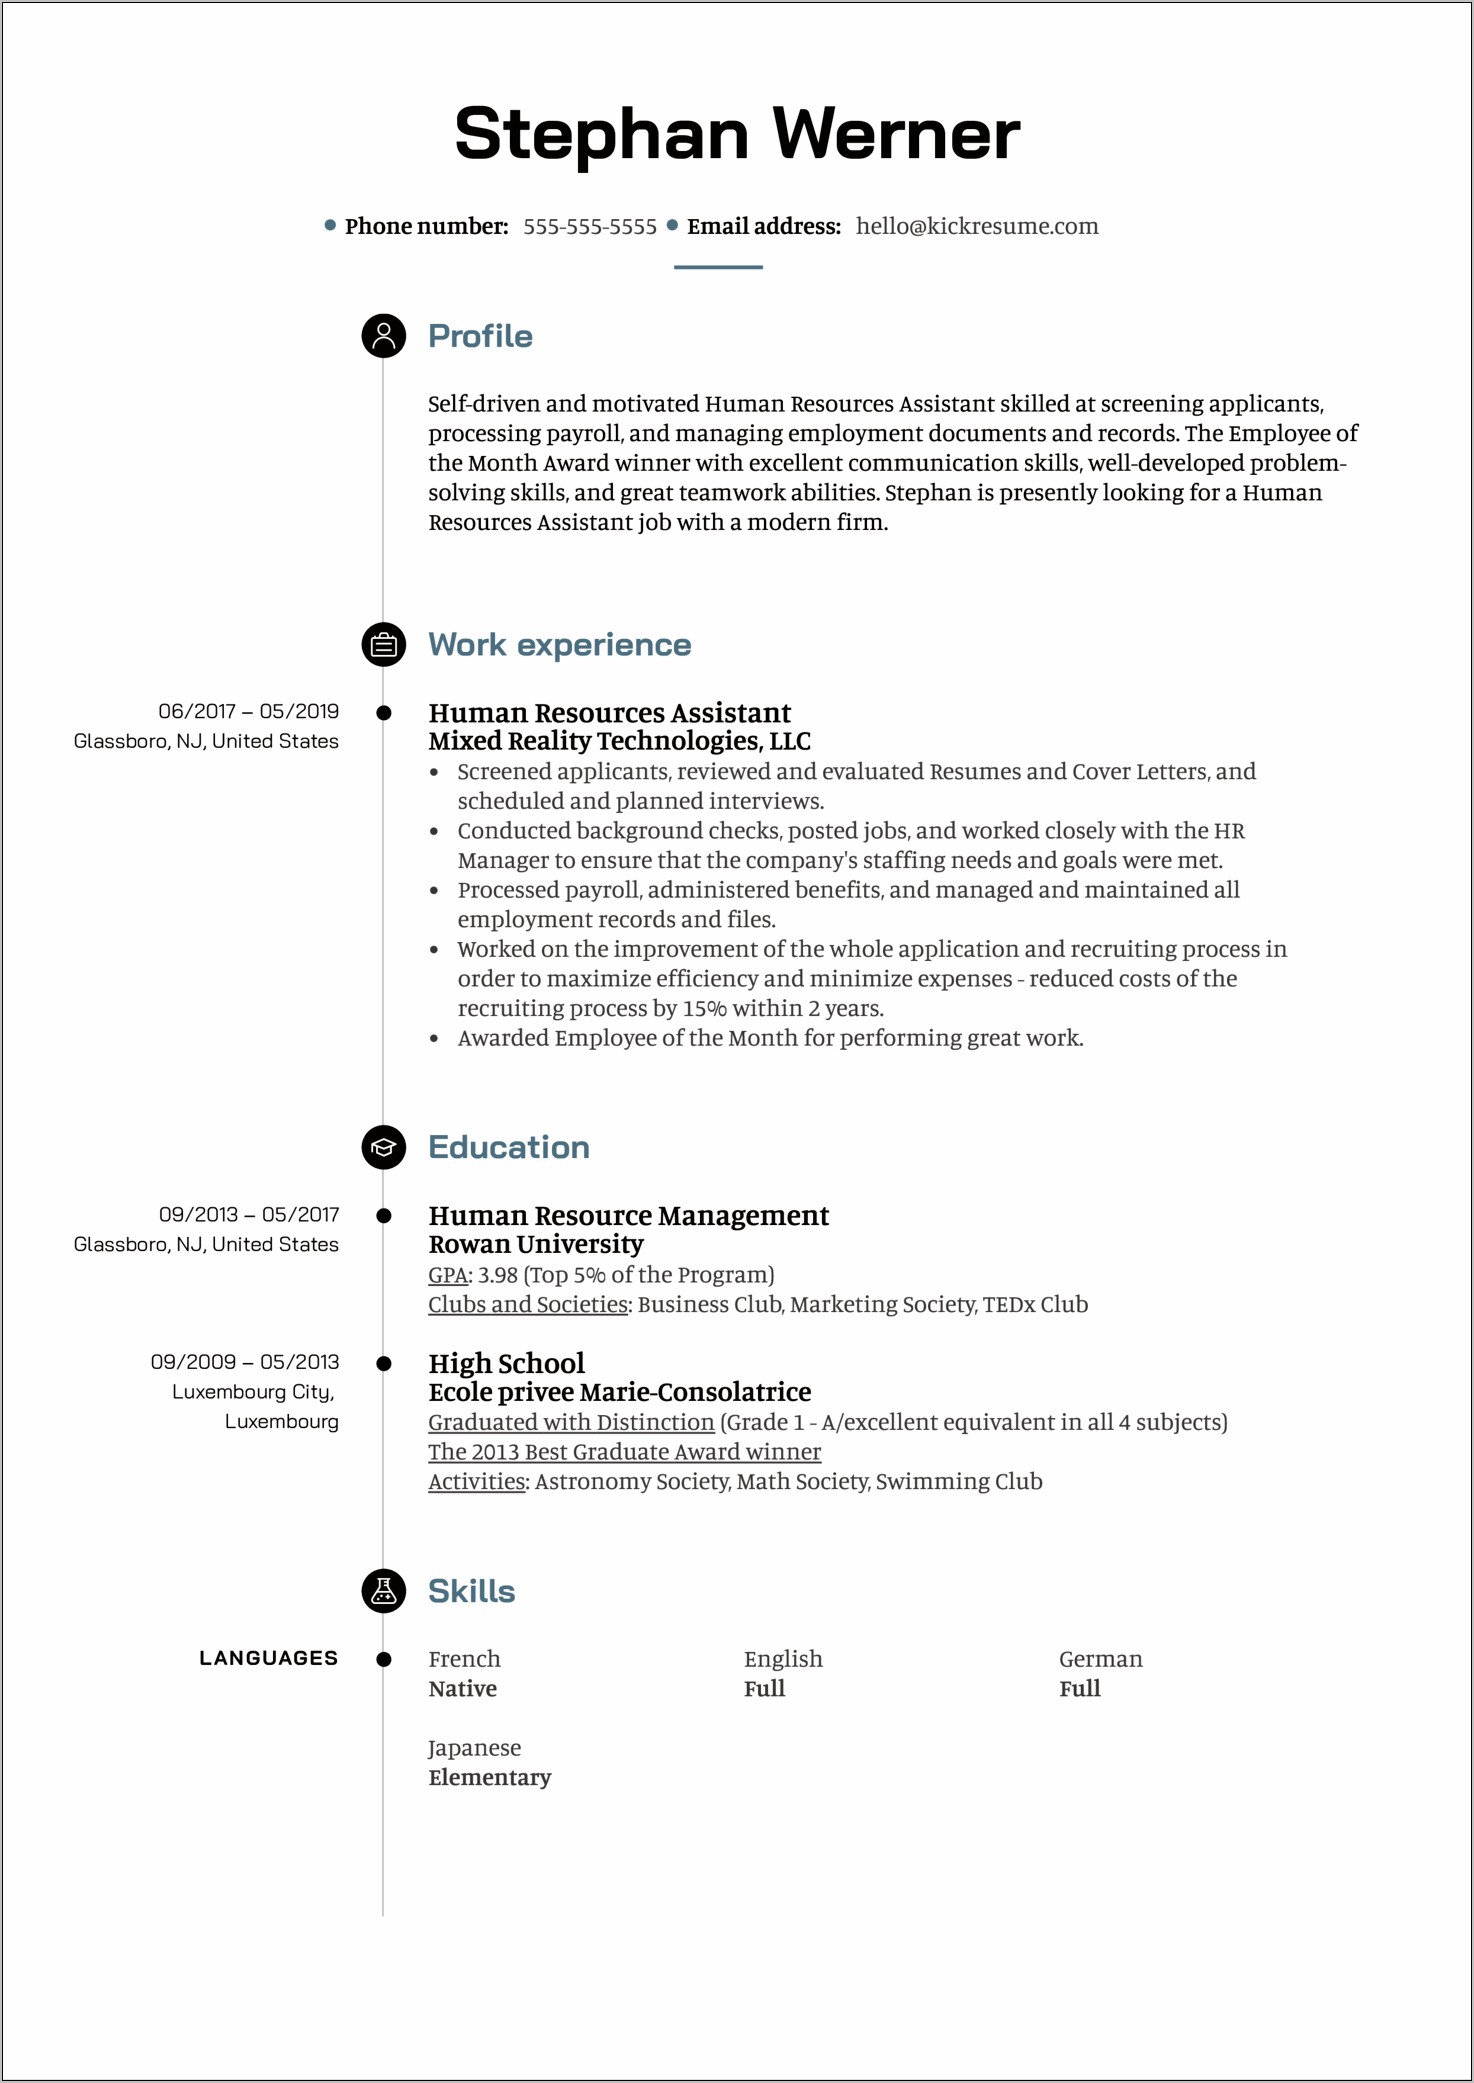 Resumes Samples For Human Resources Positions